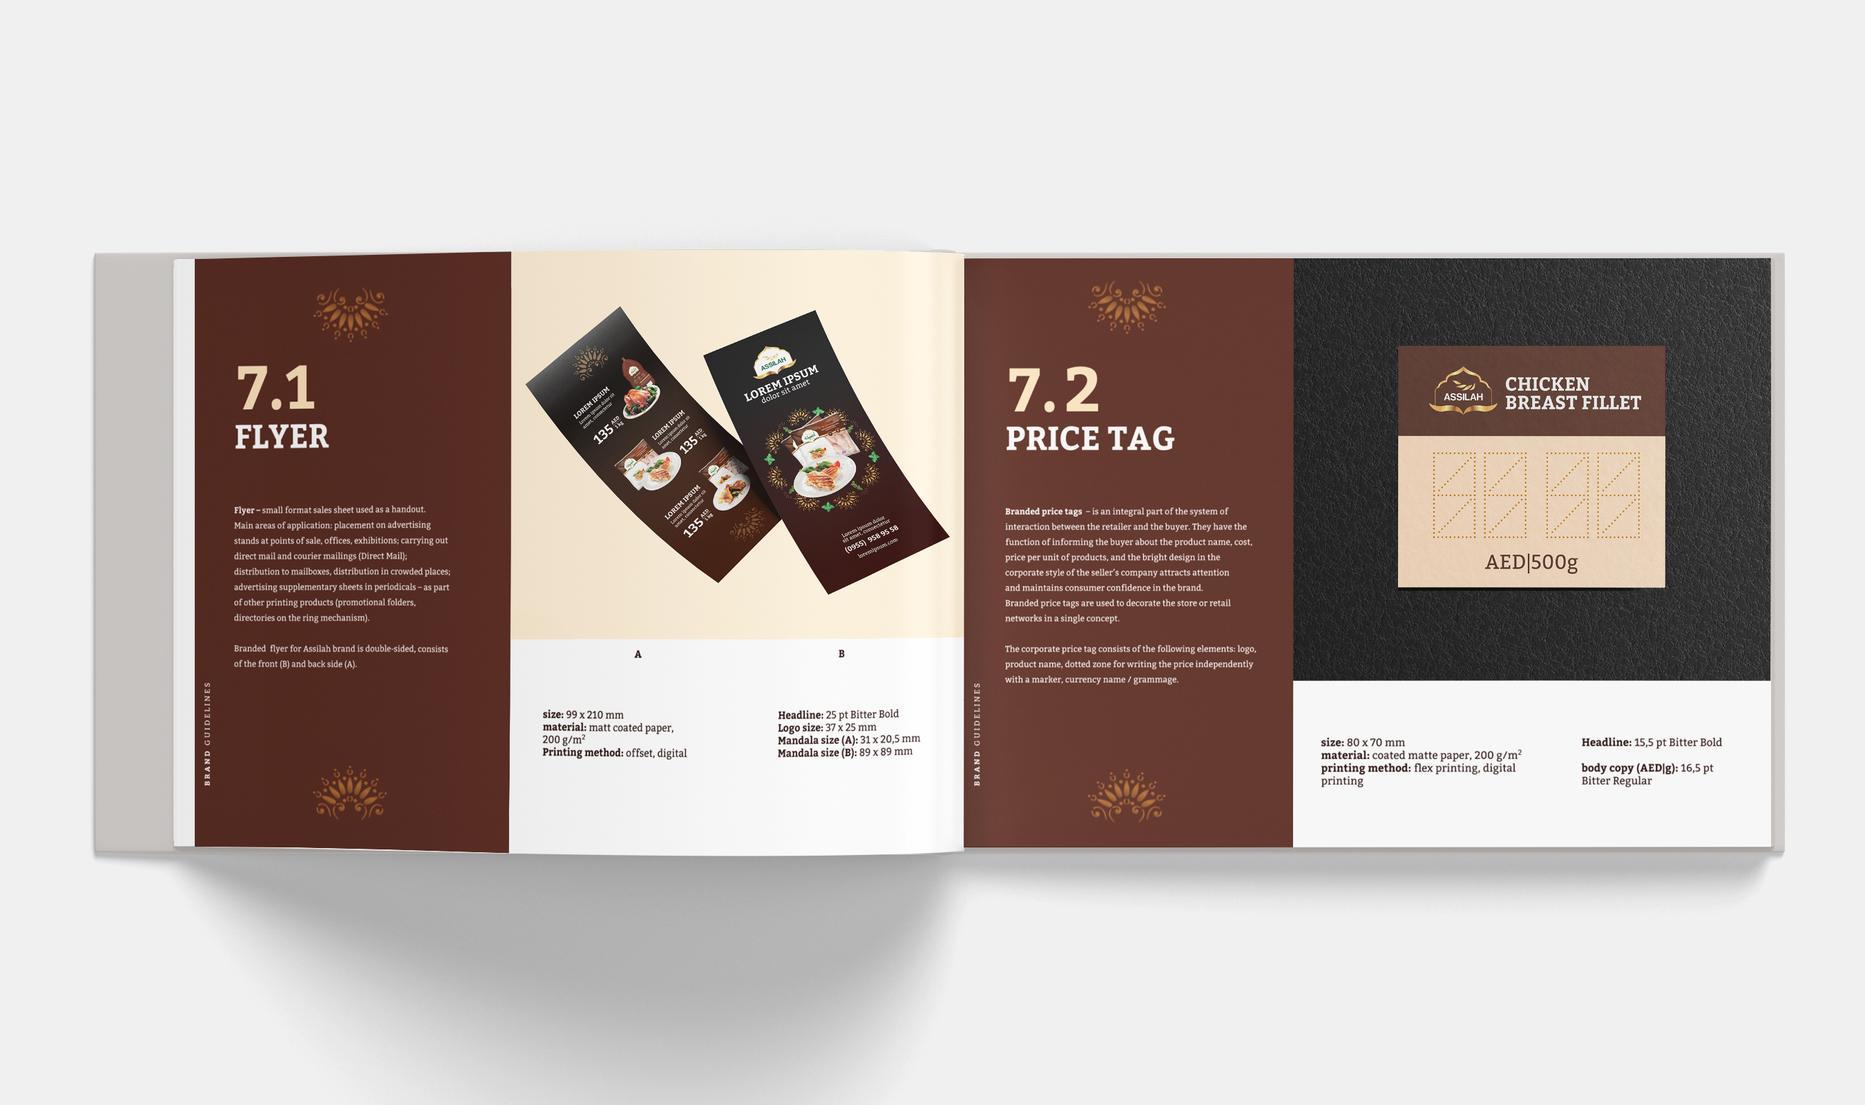 Project: Launching the MHP brand on the Arab market. Identity, brand book — Rubarb - Image - 10